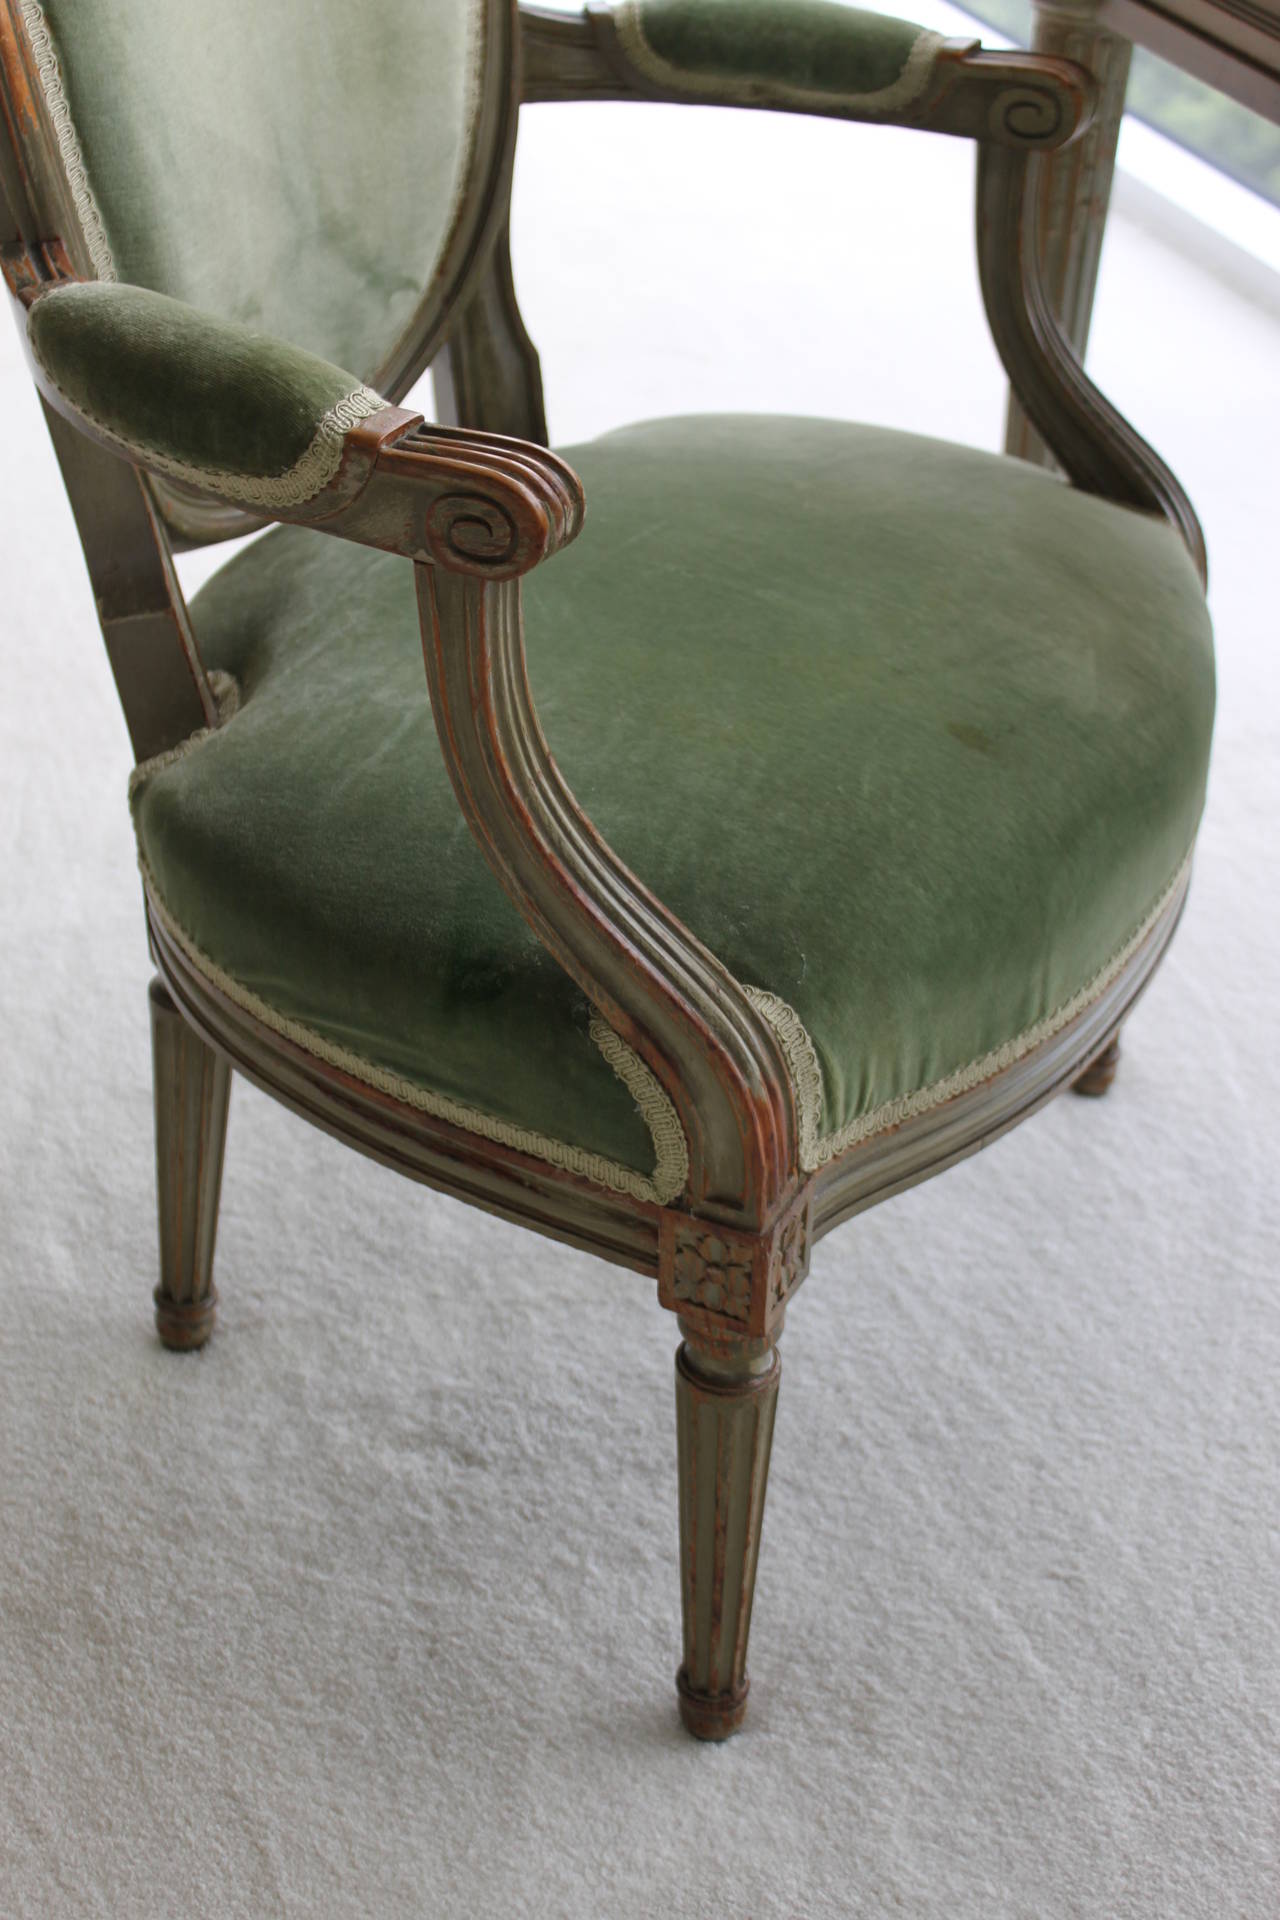 Louis XVI fauteiul chair circa early 20th century in original upholstery and original painted finish.